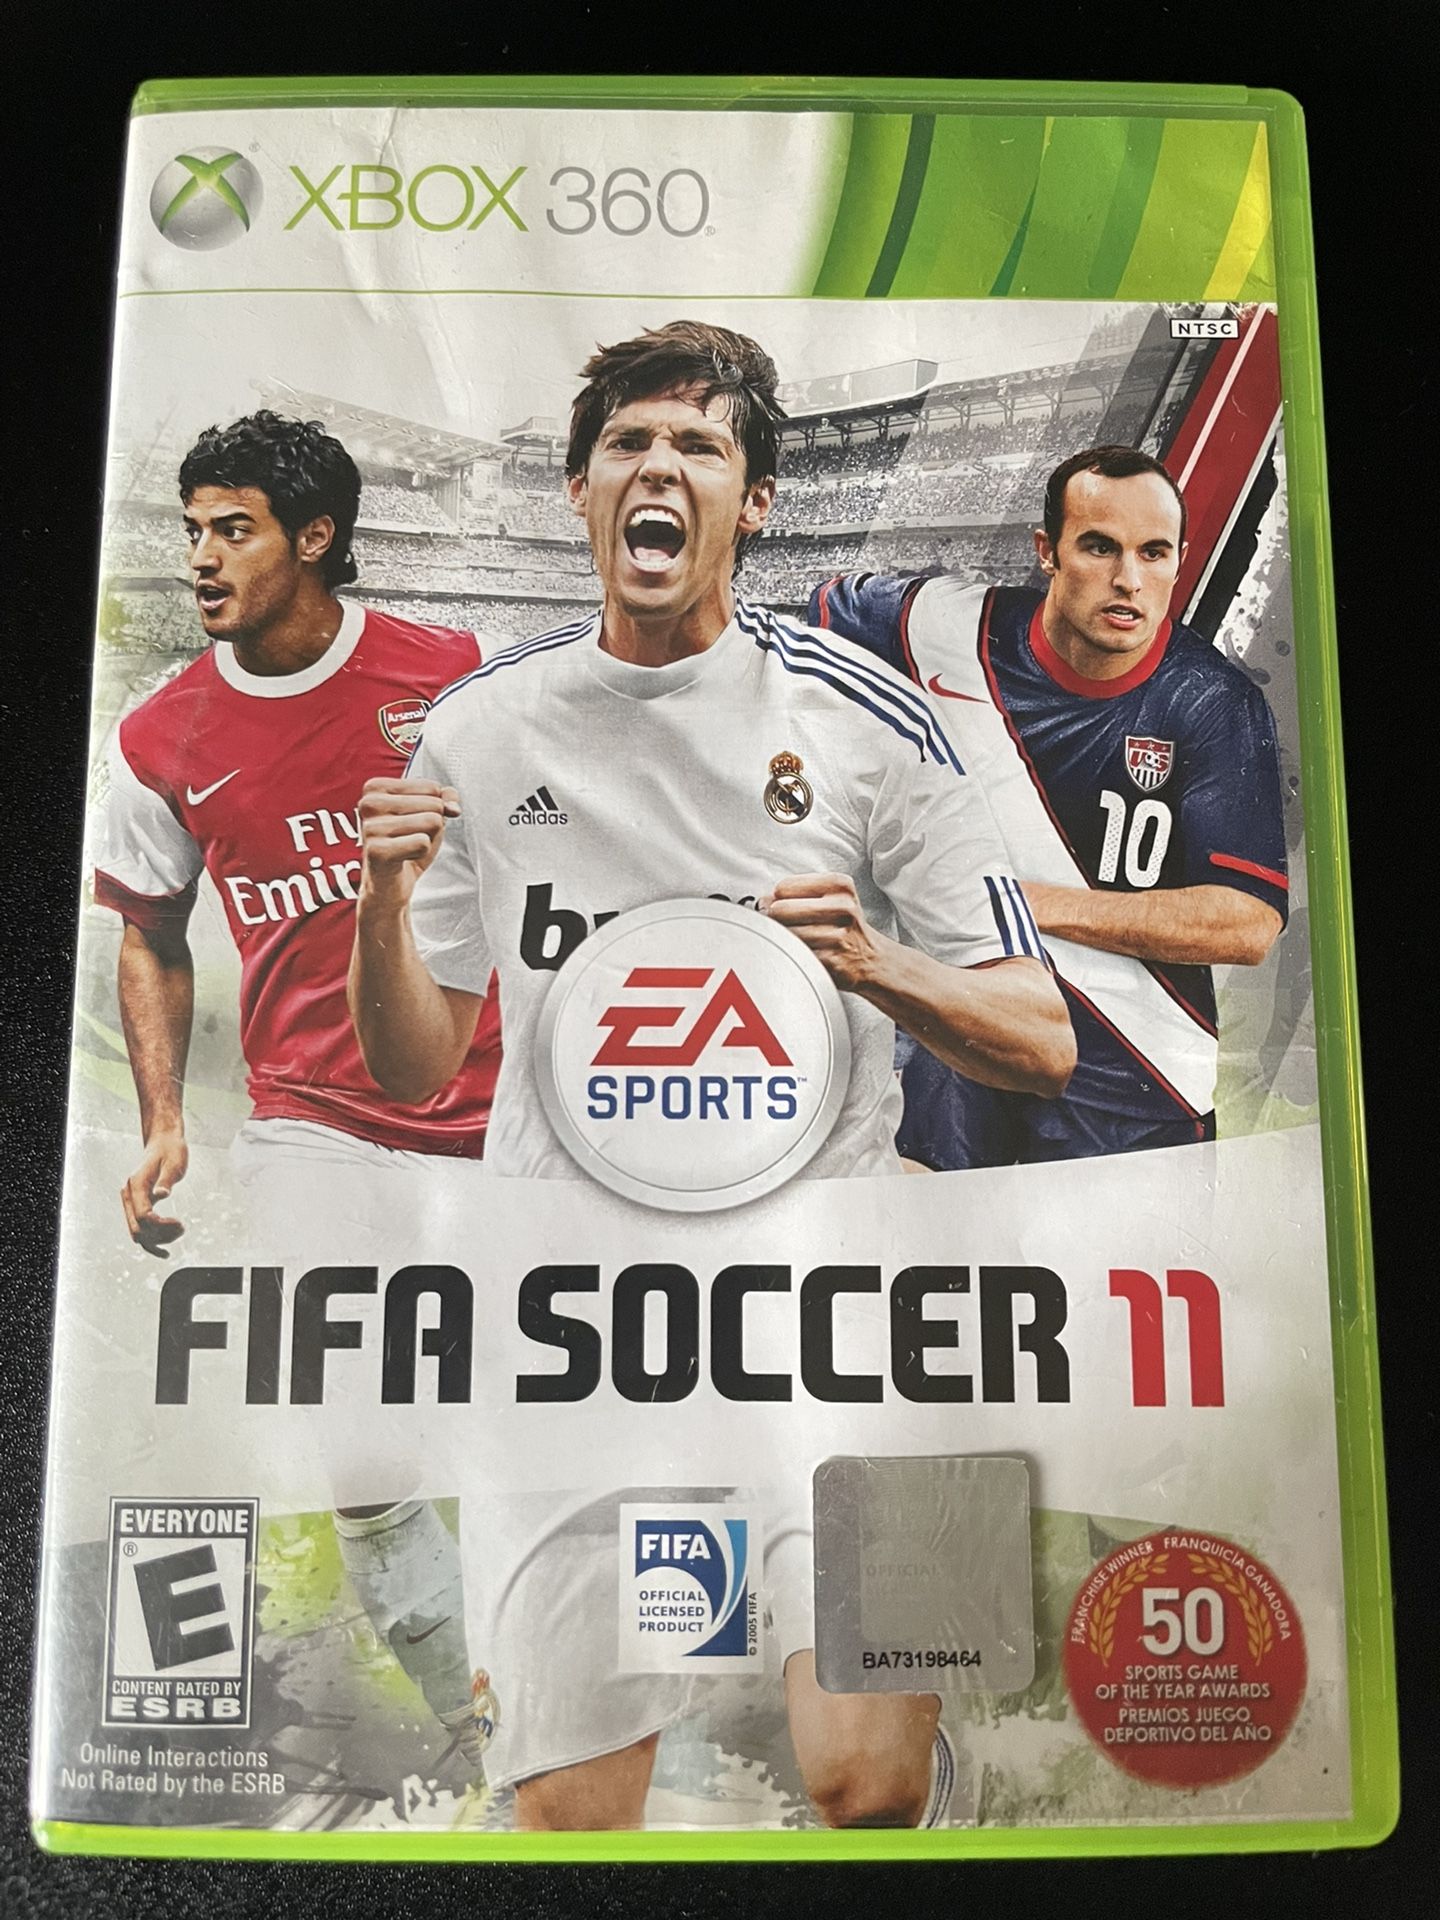 Fifa Scoccer 11 For Xbox 360 $5